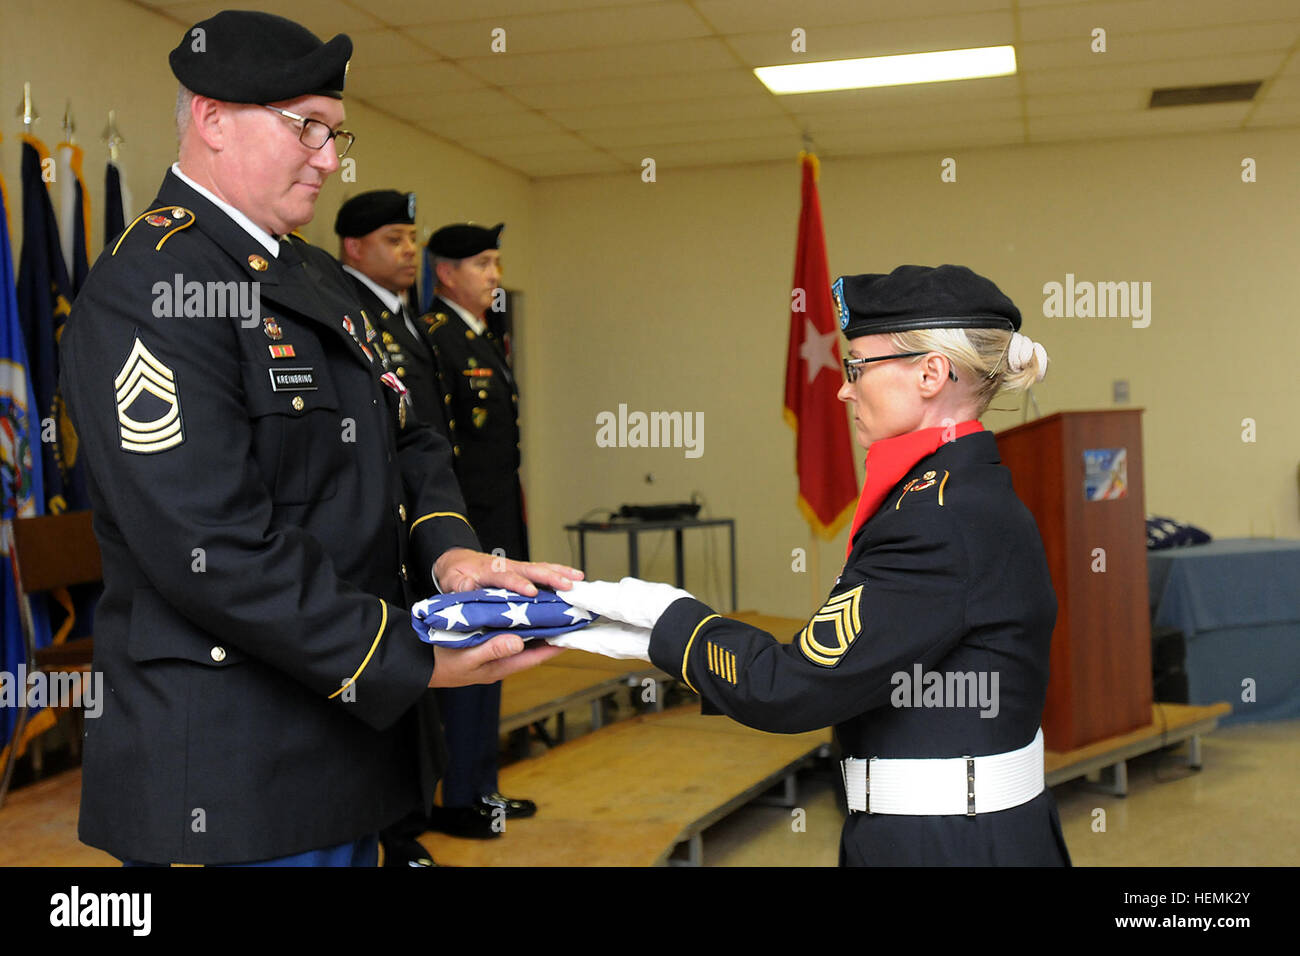 Sgt. 1st Class Maggie Cloud, 85th Support Command Color Guard, presented retired Master Sgt. Michael Kreinbring, former interim G-1 sergeant major, 85th SPT CMD, with the flag that was folded in his honor of service to the U.S. Army, Saturday, June 1, 2013.  Kreinbring entered the Army in July 1976 shortly after graduating high school, serving a total of 33 years between active duty, Army National Guard and the Army Reserve. During his retirement ceremony he was awarded the Meritorious Service Medal, the Retired Reserve lapel pin and a letter of appreciation for his service from President Bara Stock Photo